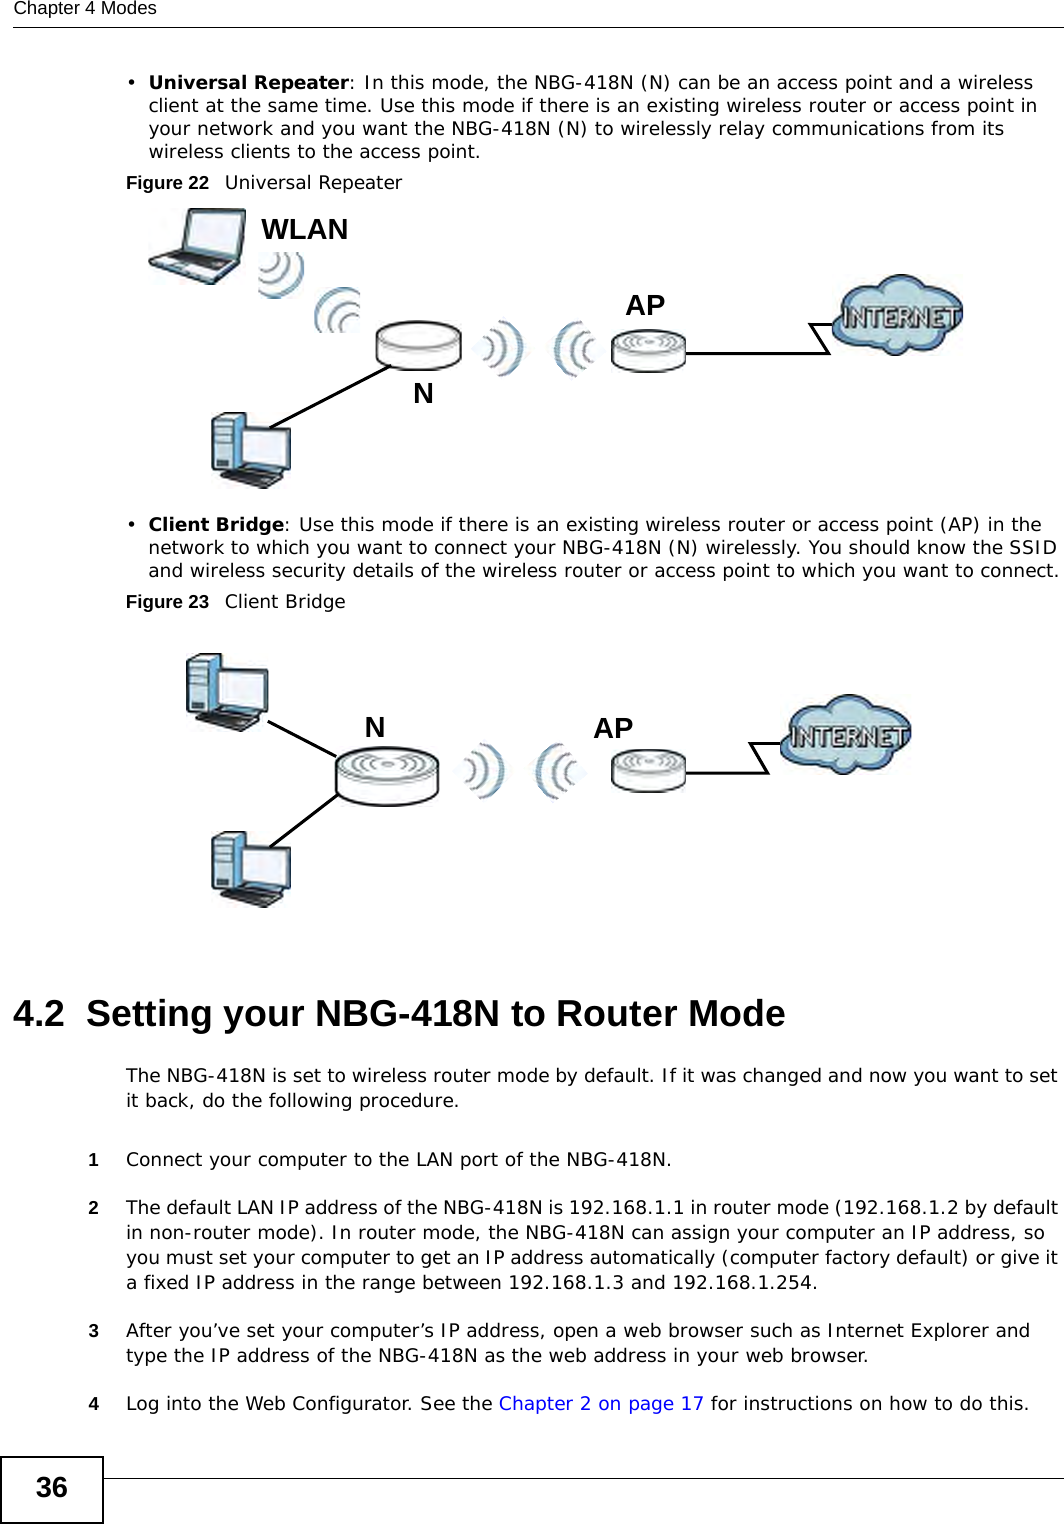 Chapter 4 Modes36•Universal Repeater: In this mode, the NBG-418N (N) can be an access point and a wireless client at the same time. Use this mode if there is an existing wireless router or access point in your network and you want the NBG-418N (N) to wirelessly relay communications from its wireless clients to the access point.Figure 22   Universal Repeater •Client Bridge: Use this mode if there is an existing wireless router or access point (AP) in the network to which you want to connect your NBG-418N (N) wirelessly. You should know the SSID and wireless security details of the wireless router or access point to which you want to connect.Figure 23   Client Bridge4.2  Setting your NBG-418N to Router ModeThe NBG-418N is set to wireless router mode by default. If it was changed and now you want to set it back, do the following procedure.1Connect your computer to the LAN port of the NBG-418N. 2The default LAN IP address of the NBG-418N is 192.168.1.1 in router mode (192.168.1.2 by default in non-router mode). In router mode, the NBG-418N can assign your computer an IP address, so you must set your computer to get an IP address automatically (computer factory default) or give it a fixed IP address in the range between 192.168.1.3 and 192.168.1.254.3After you’ve set your computer’s IP address, open a web browser such as Internet Explorer and type the IP address of the NBG-418N as the web address in your web browser.4Log into the Web Configurator. See the Chapter 2 on page 17 for instructions on how to do this.LEWNAPWLANLEWNAP